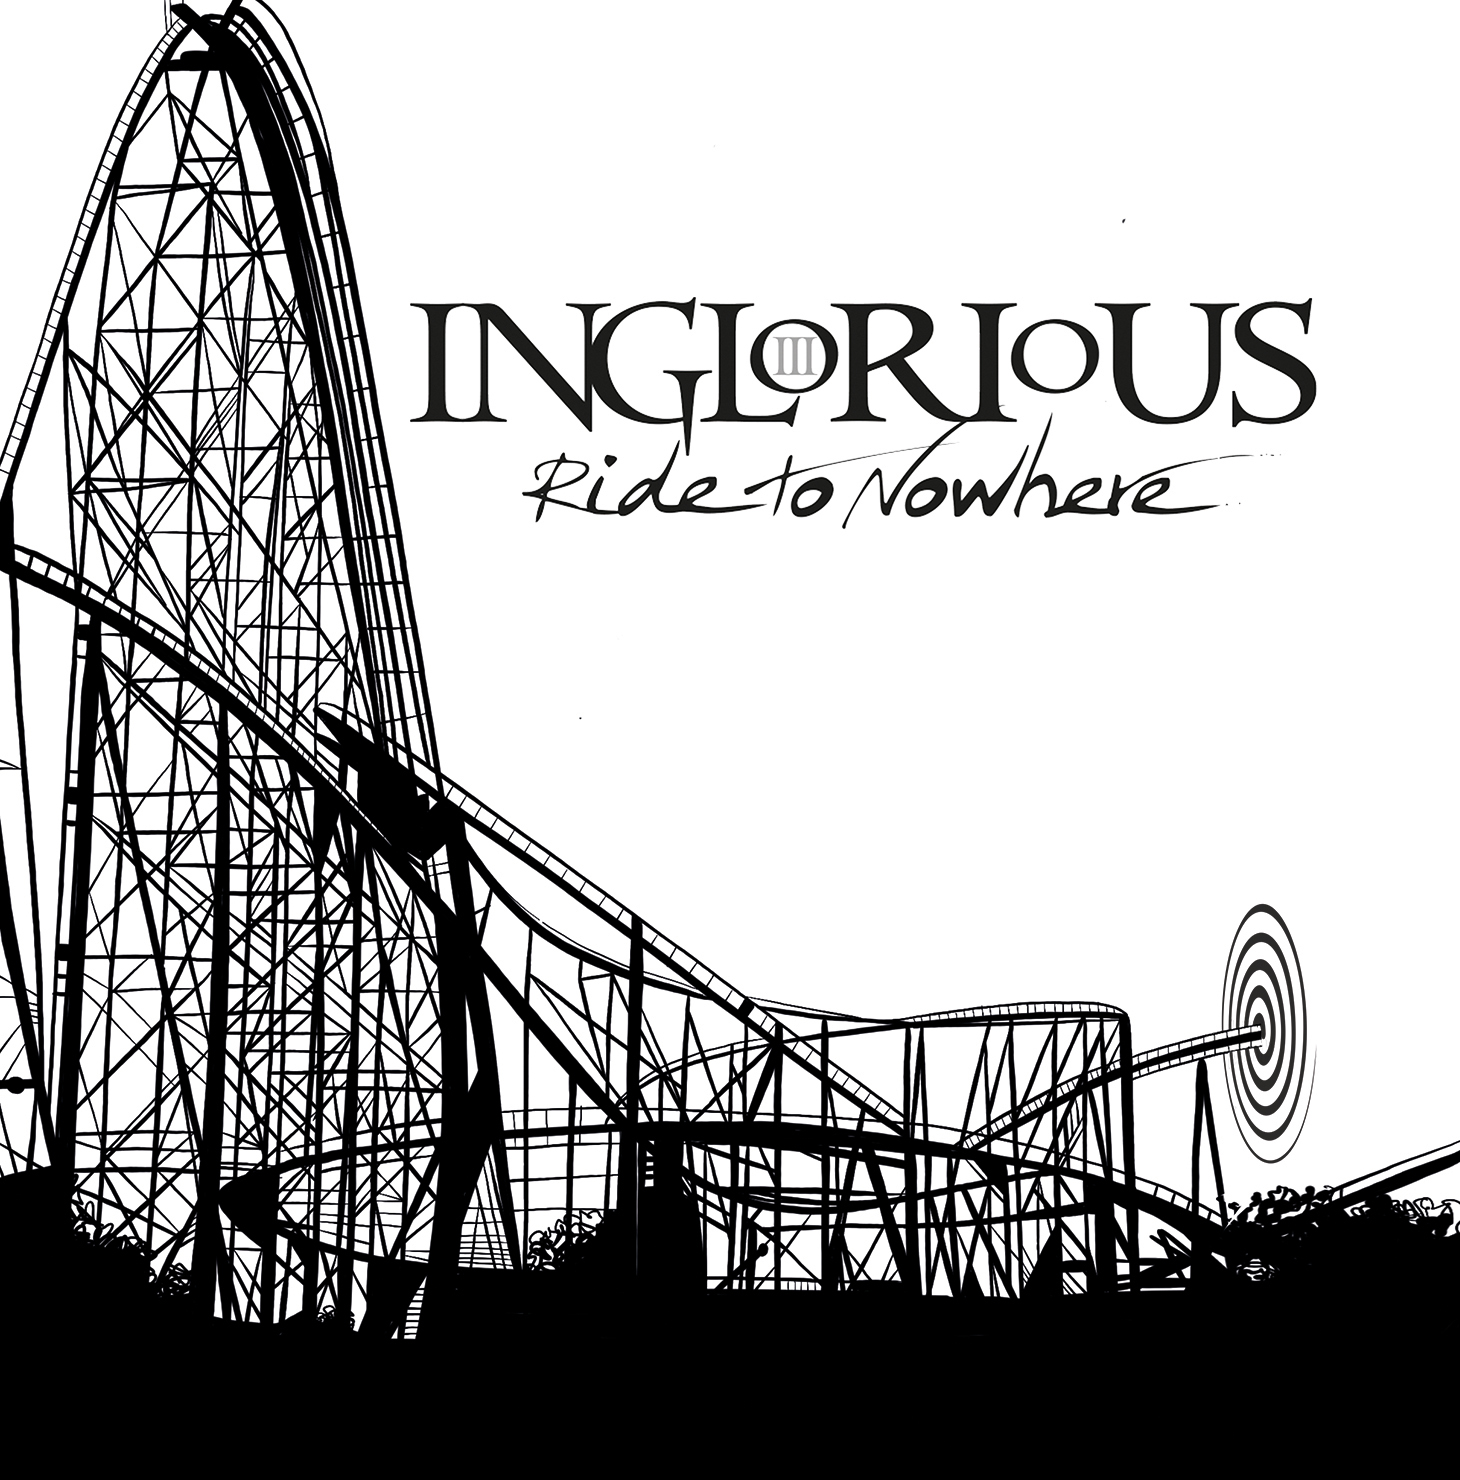 Inglorious  - Ride to Nowhere